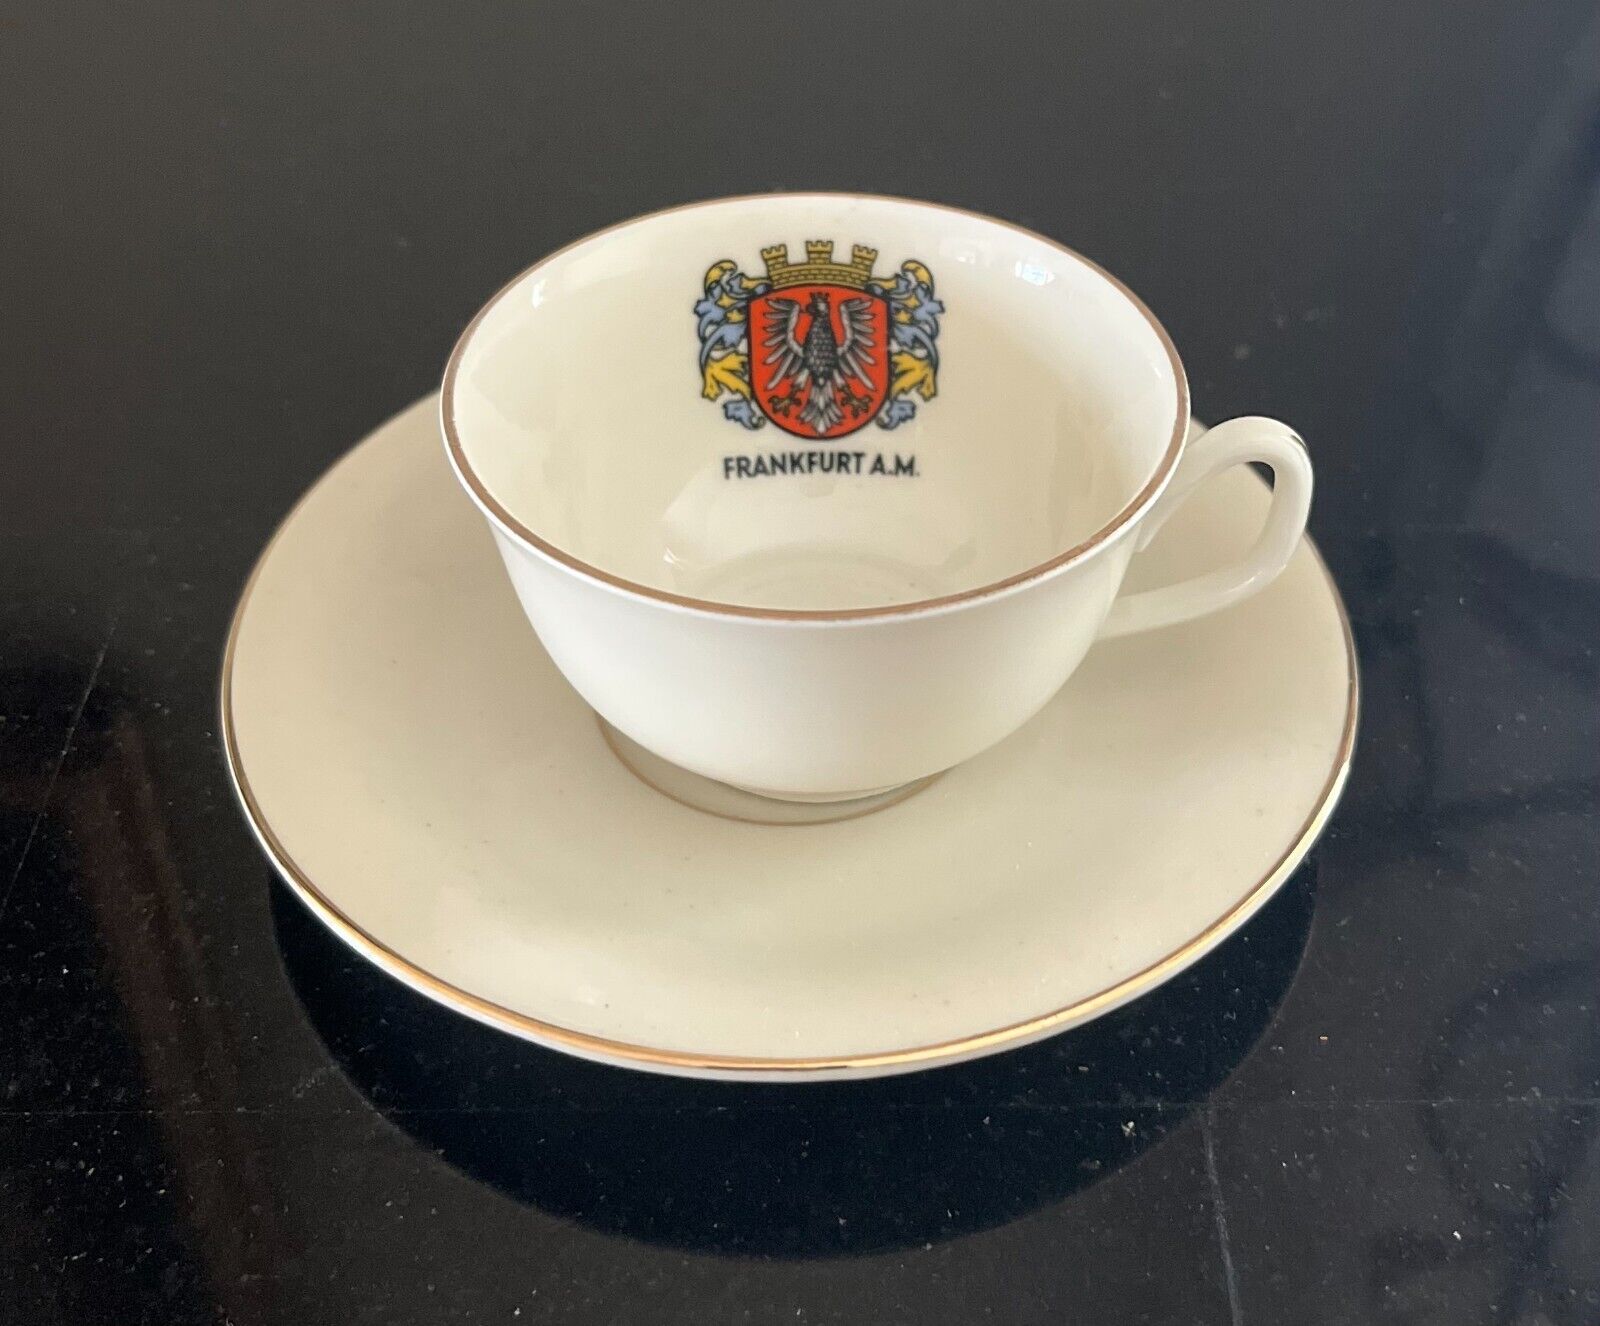 Creidlitz Bavaria Frankfurt A M Teacup and Saucer Made in Germany Coat of Arms